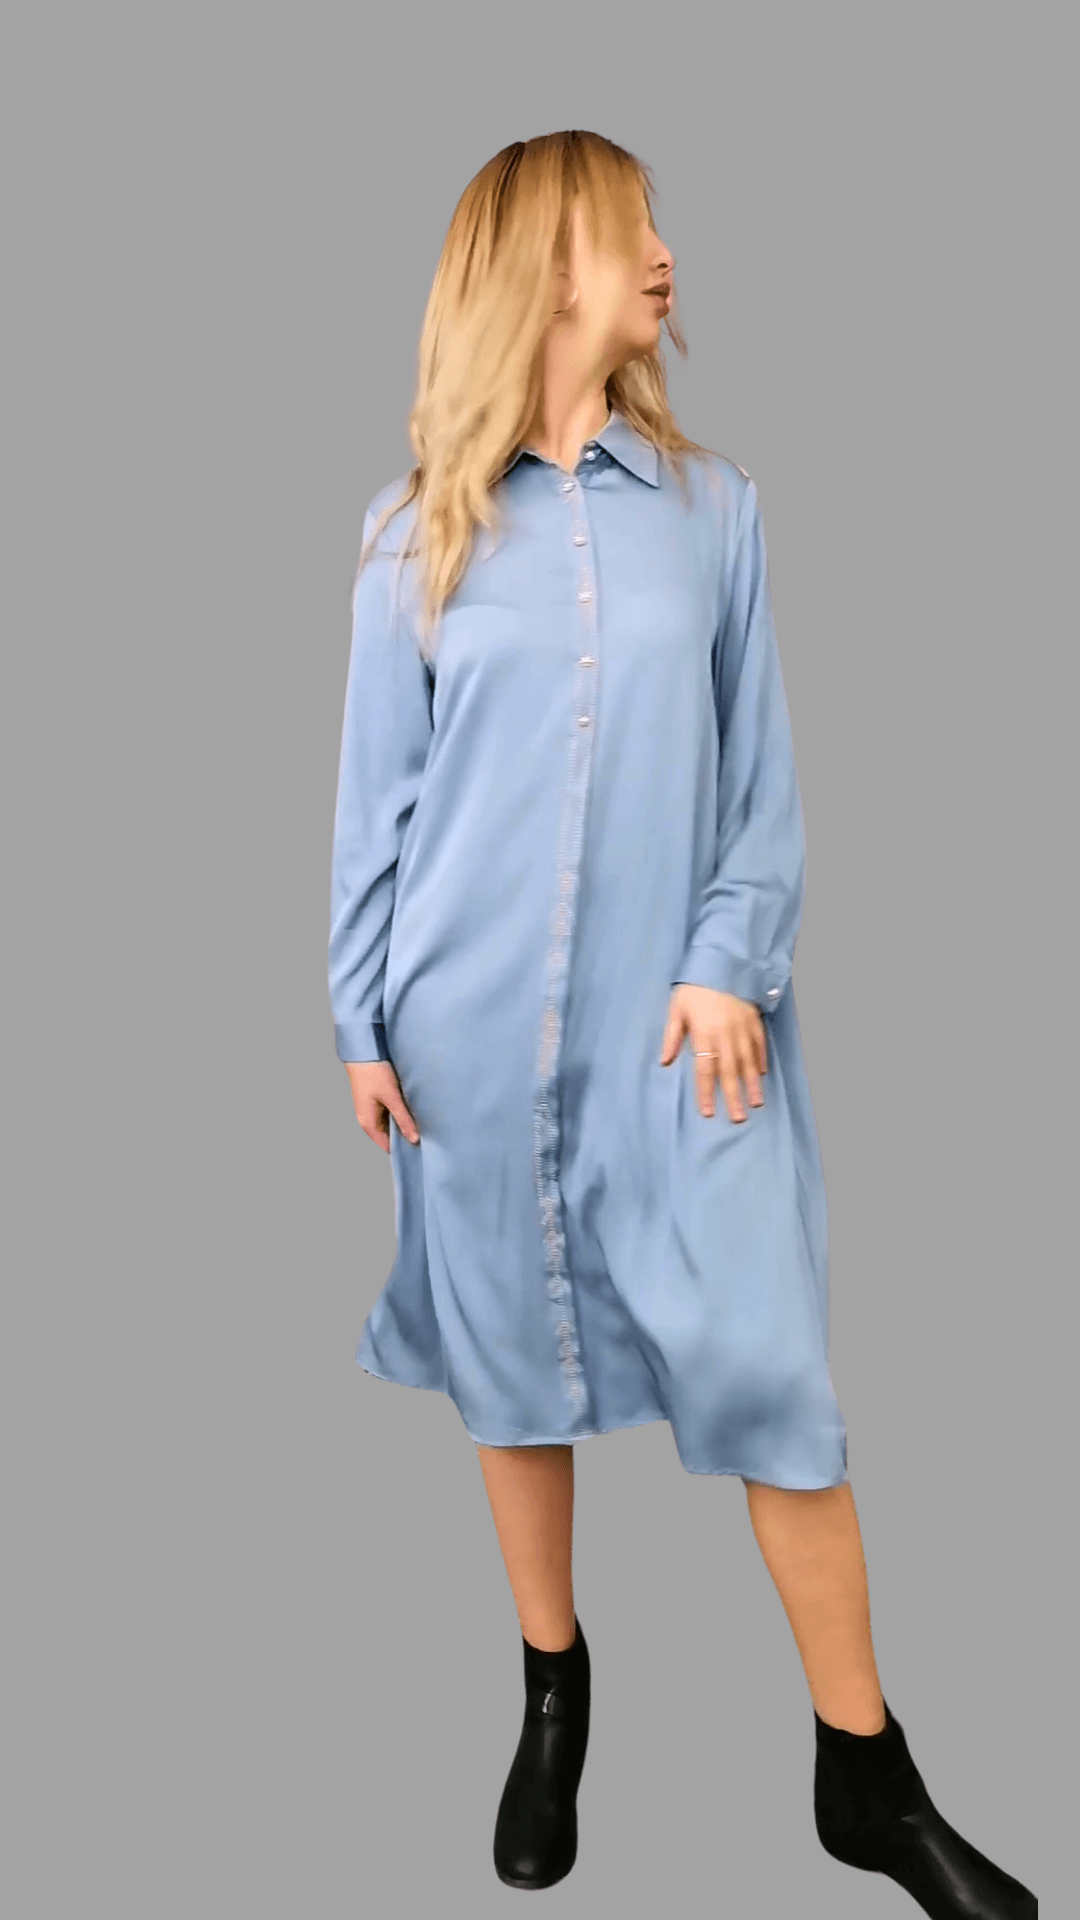 Mulberry Silk Dress in Pale Blue with Embroidery Design one size